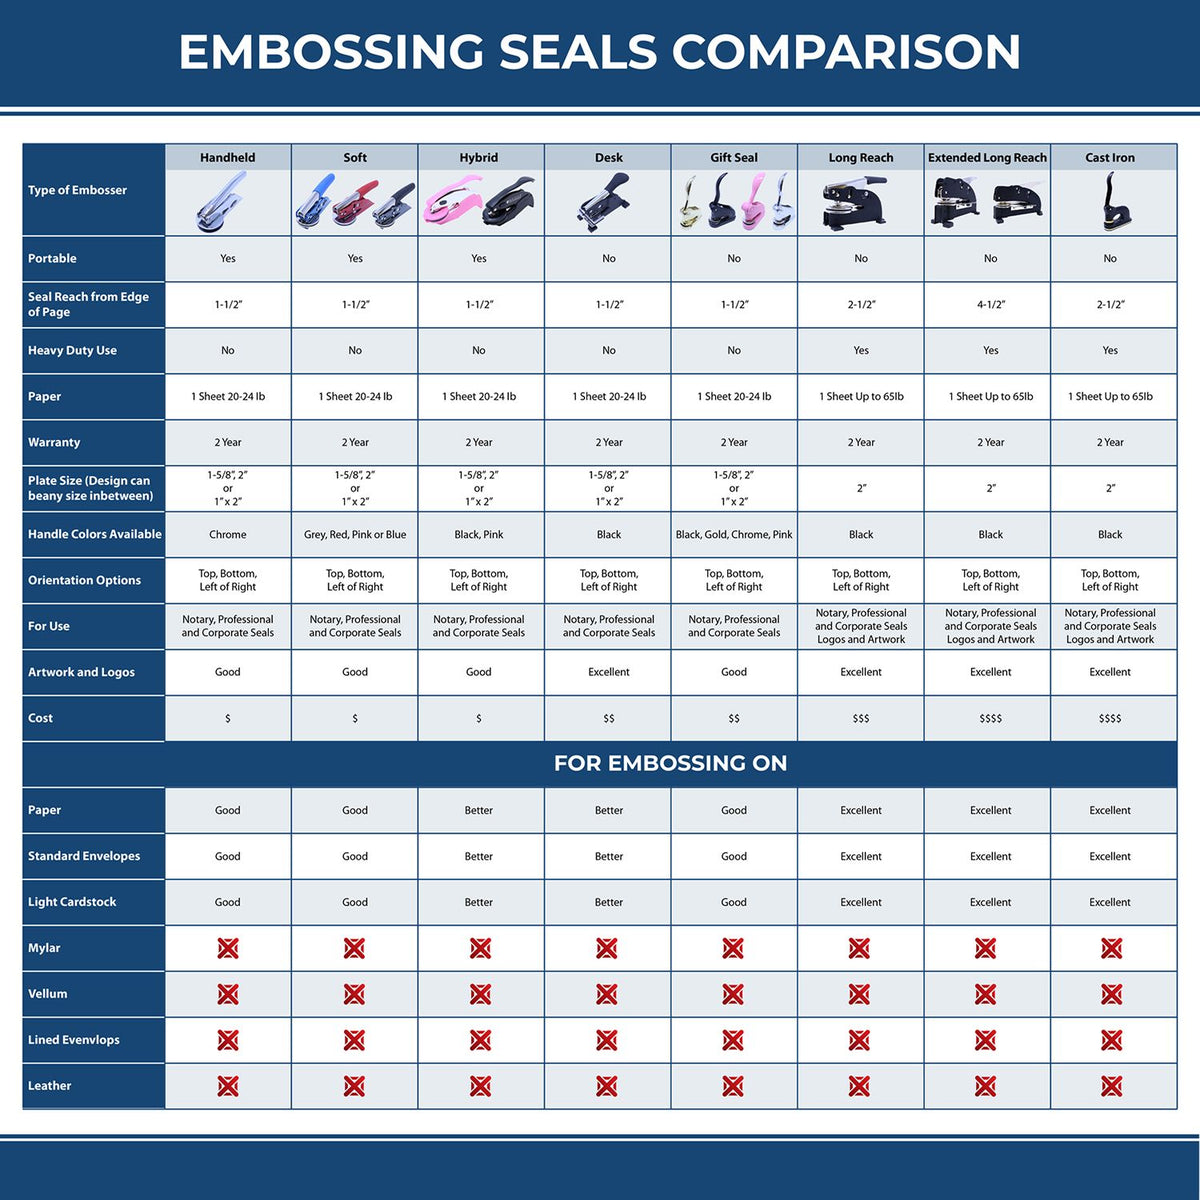 A comparison chart for the different types of mount models available for the State of Arizona Extended Long Reach Geologist Seal